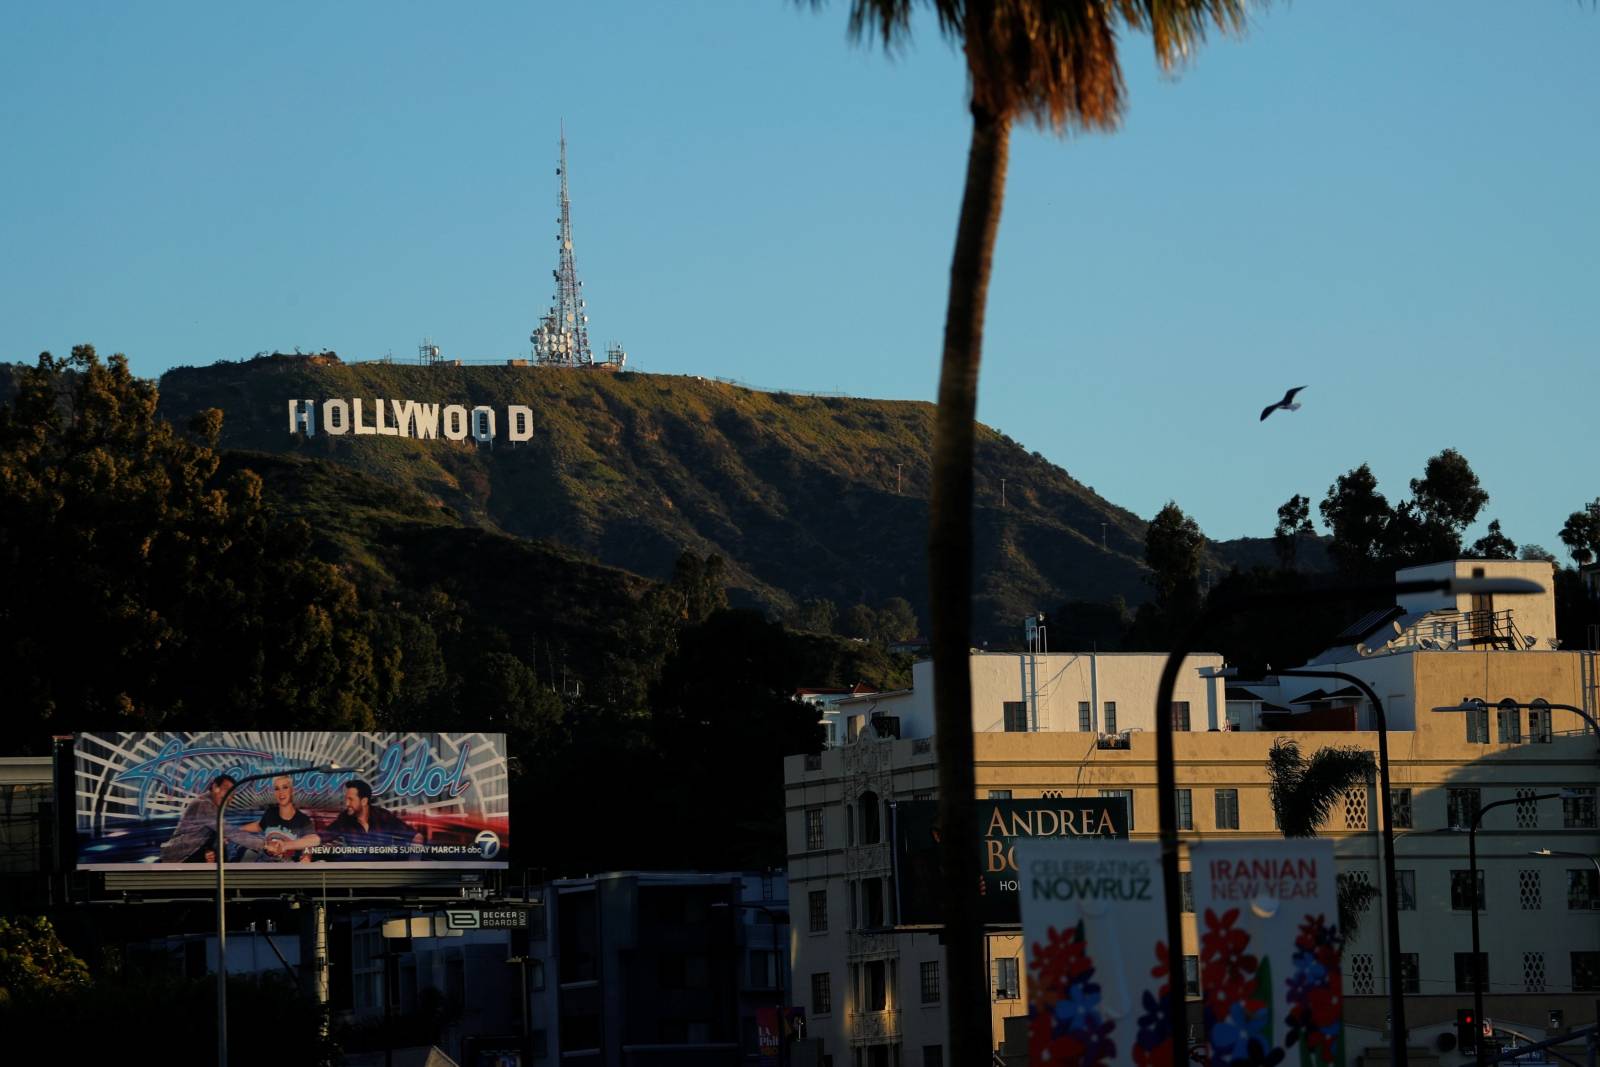 Morning light falls on the iconic Hollywood sign as preparations for the 91st Academy Awards continue in Los Angeles